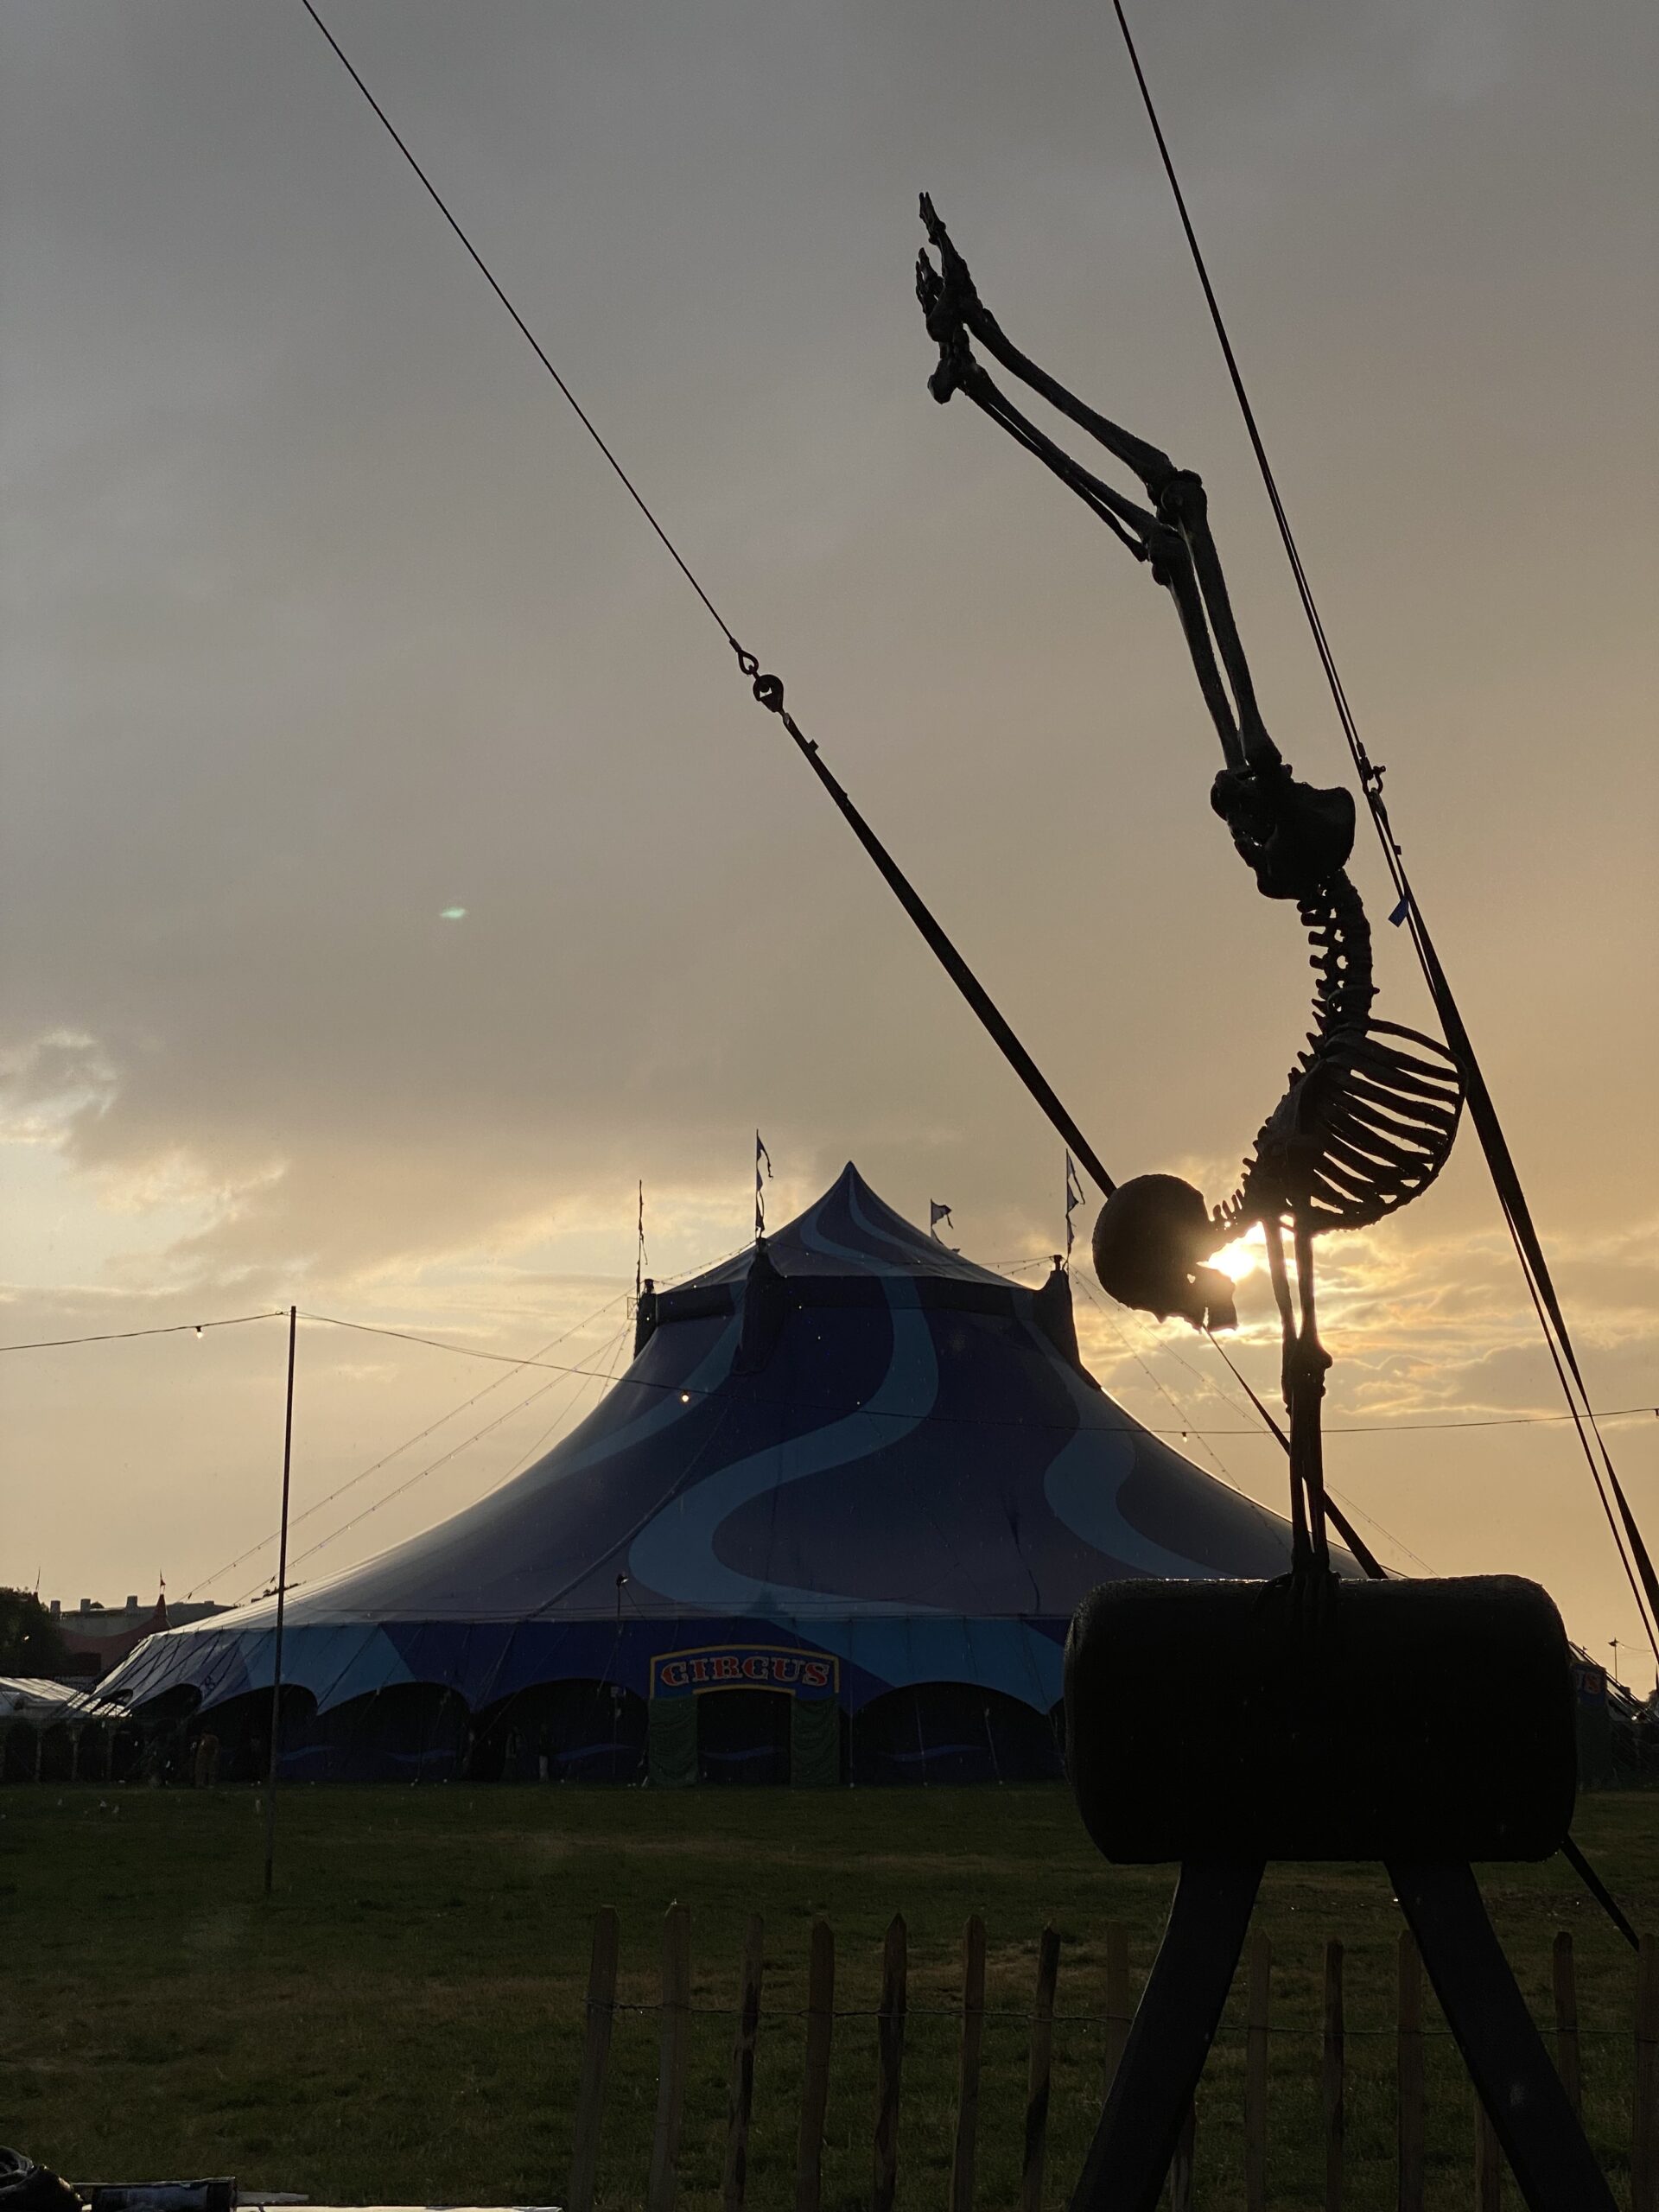 Backflip Skeleton Sculpture by Wilfred Pritchard from The Sculpture Park at Glastonbury, at dusk